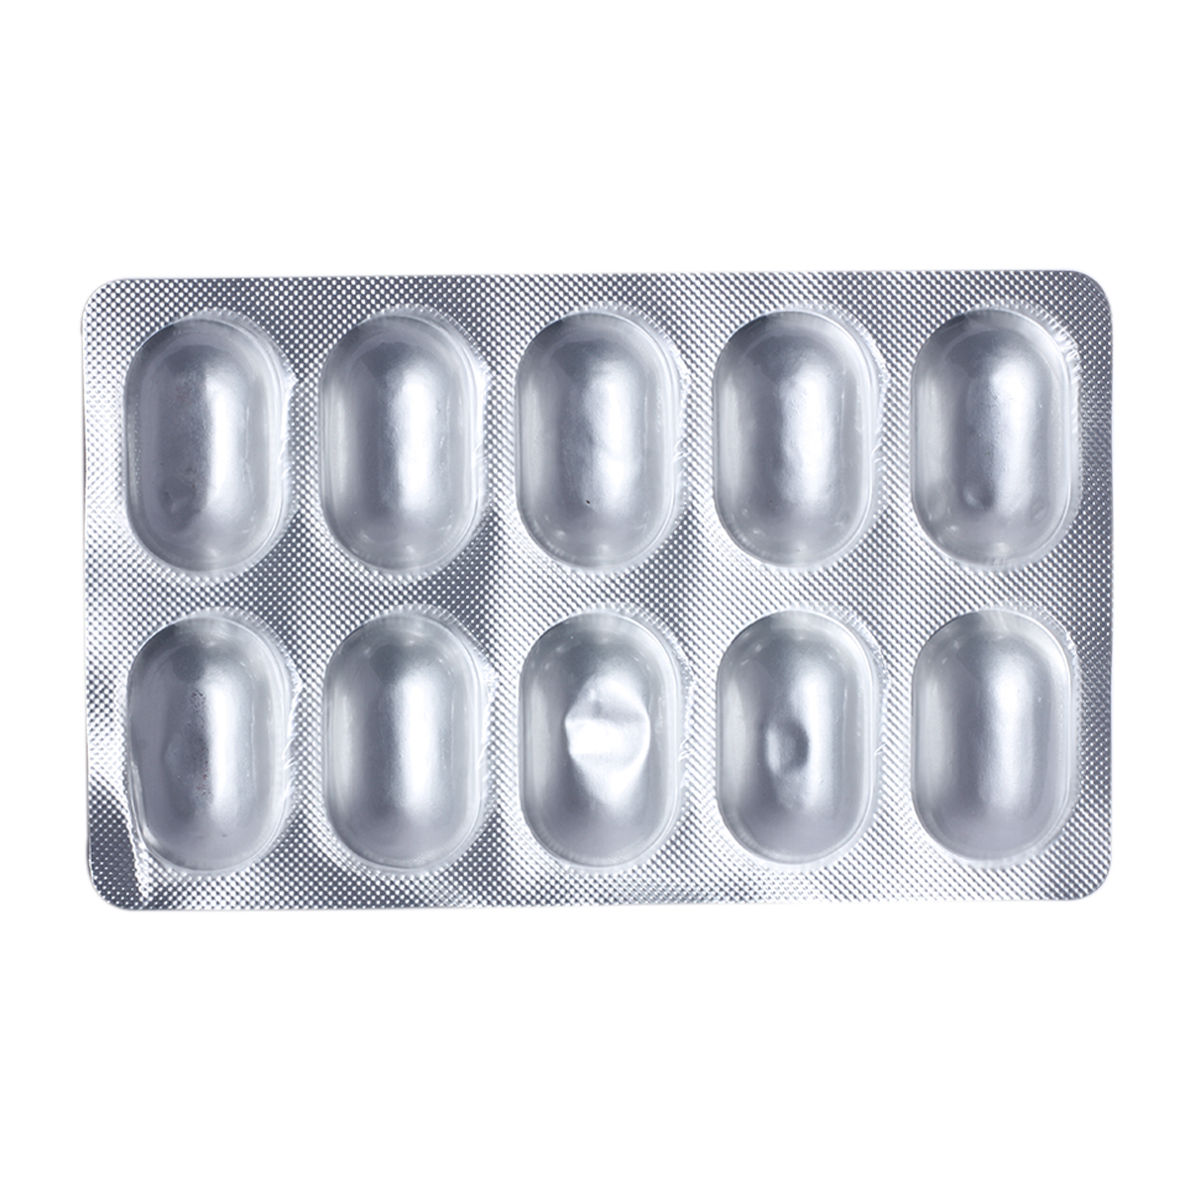 Acenac Sp Tablet 10 S Price Uses Side Effects Composition Apollo Pharmacy